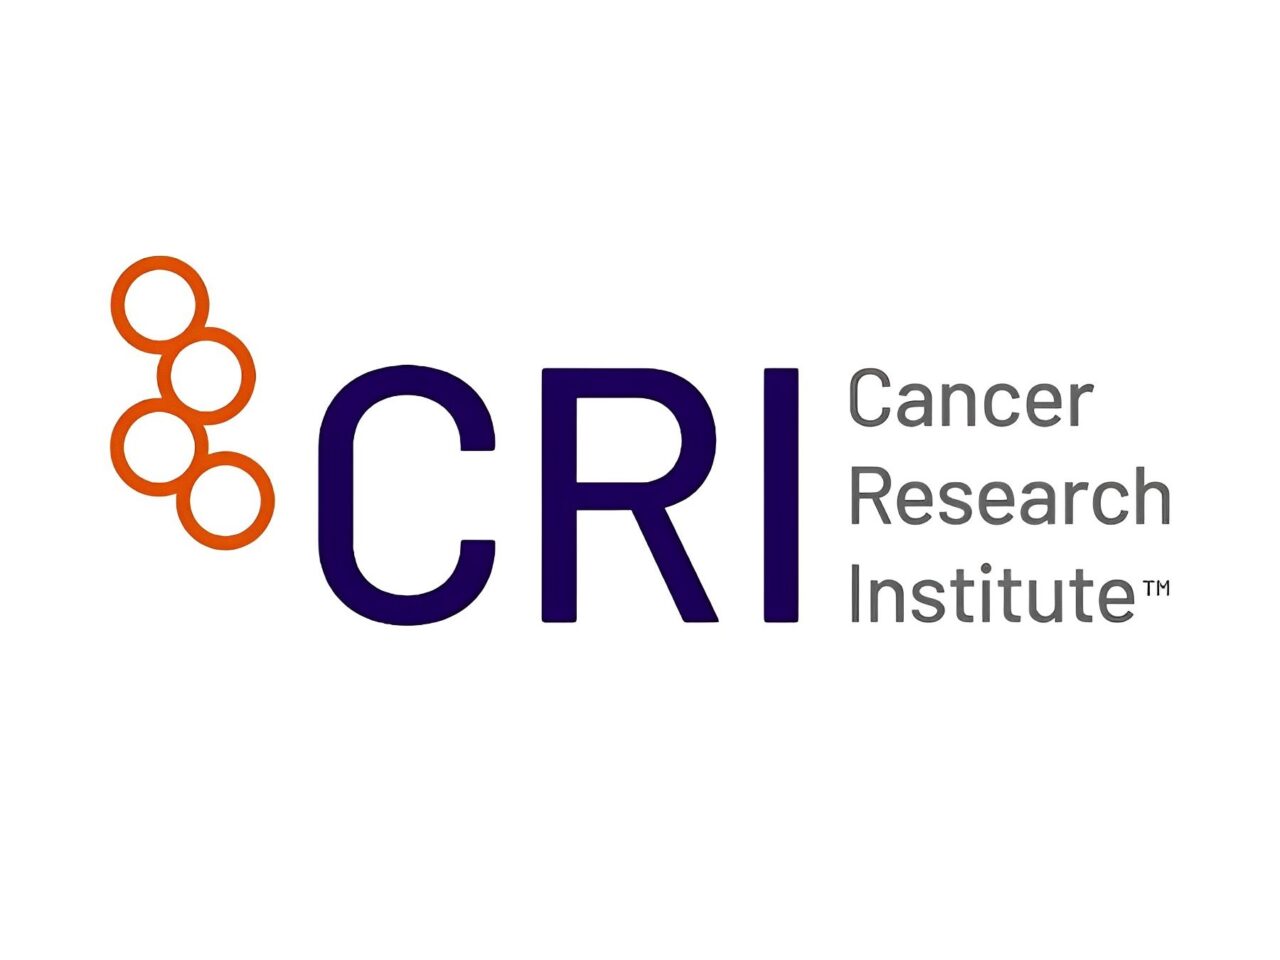 Cancer Research Institute – The Importance of Immune 2 Cancer Day